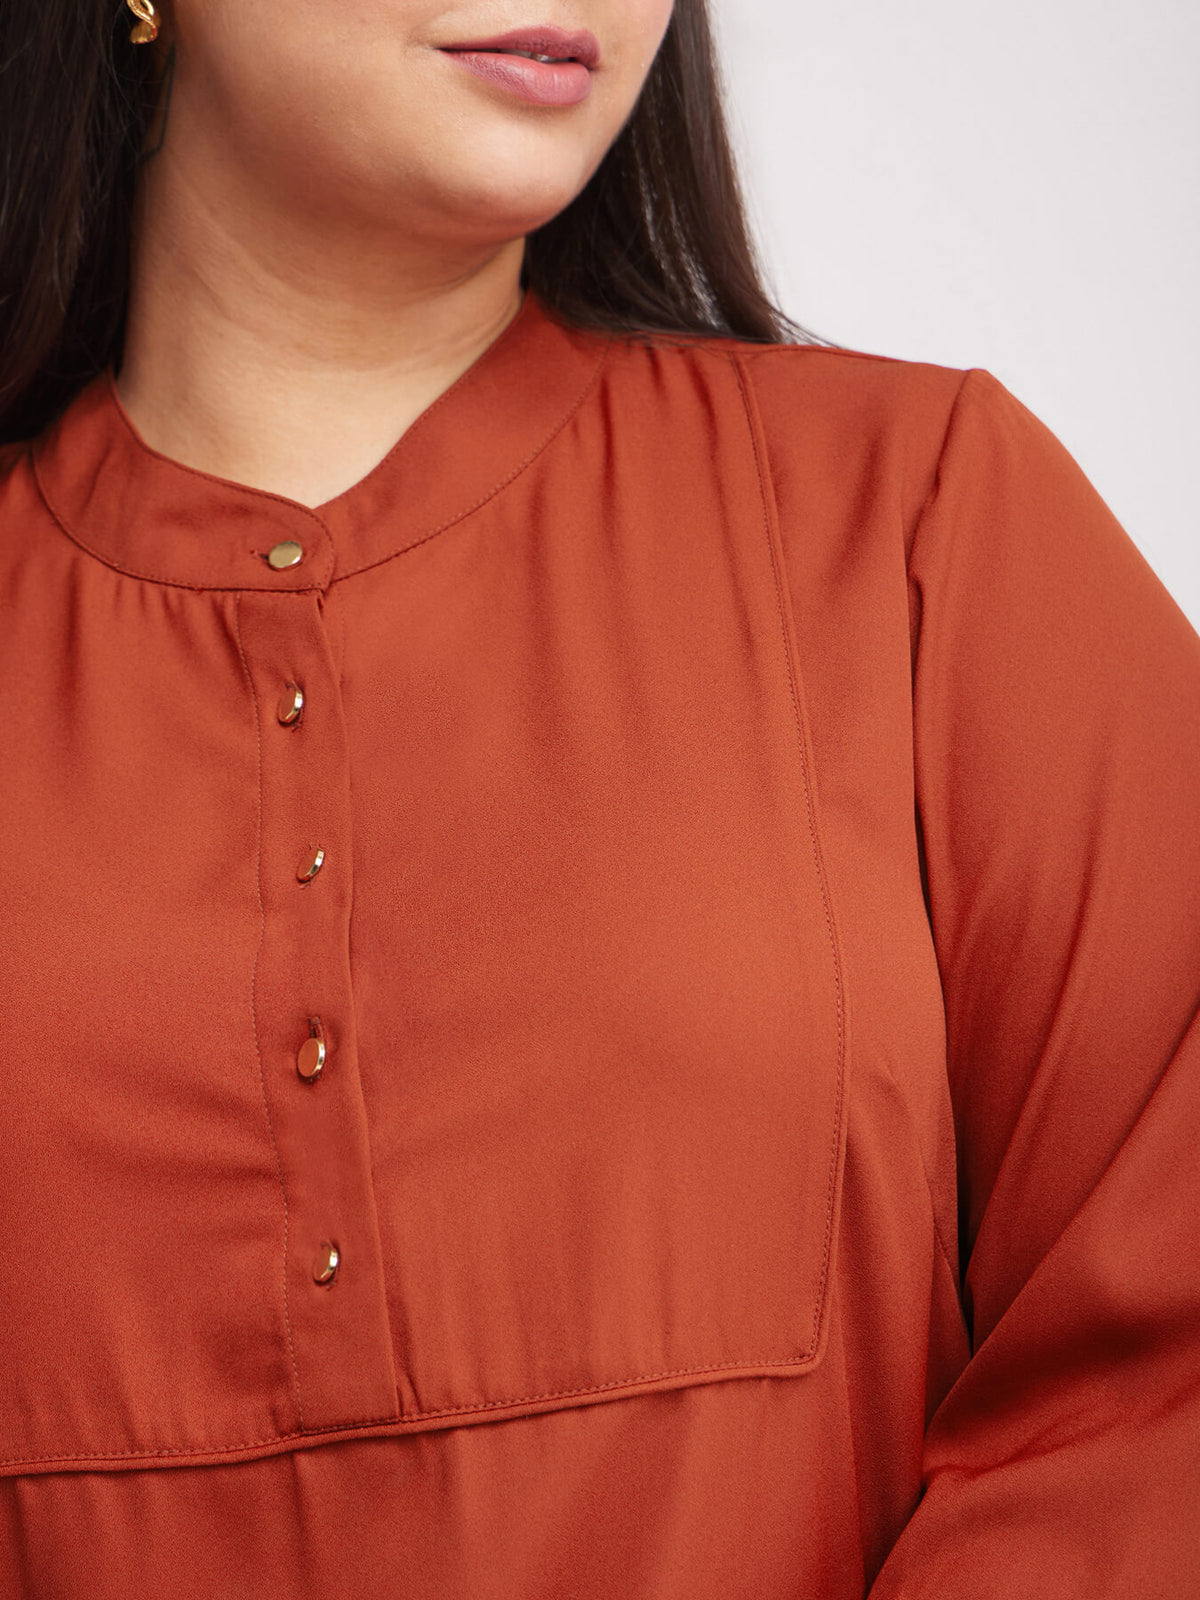 Front Button Detail Top - Rust